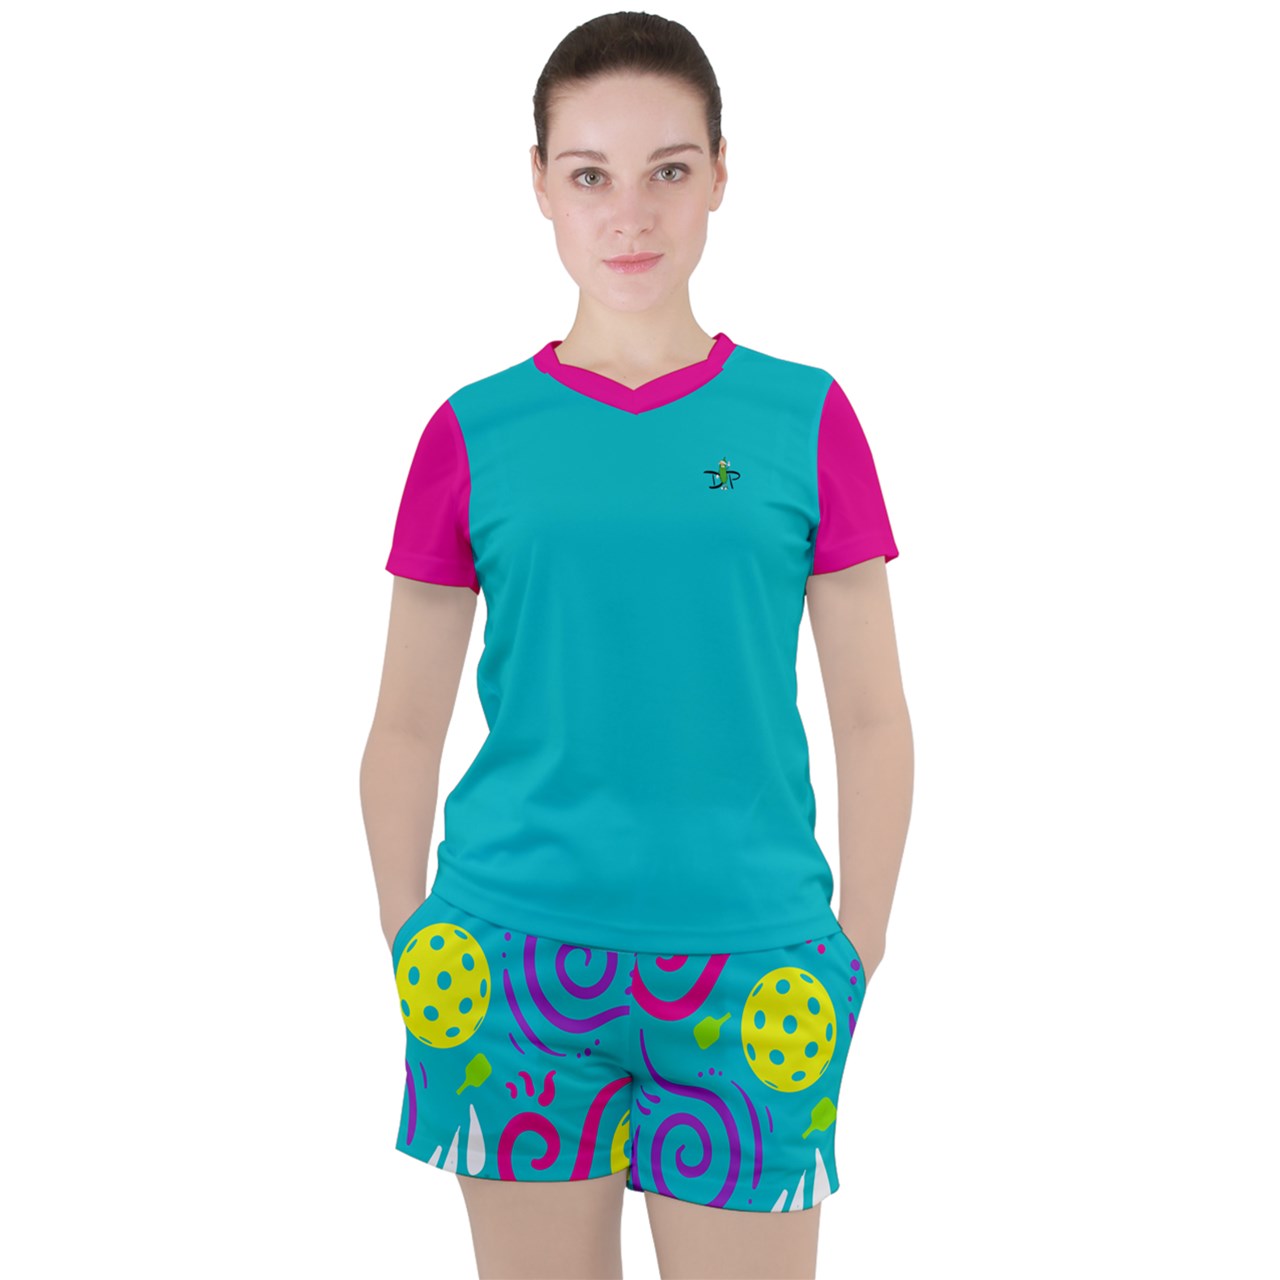 It's Swell - Women's Mesh Pickleball Tee and Shorts Set by Dizzy Pickle